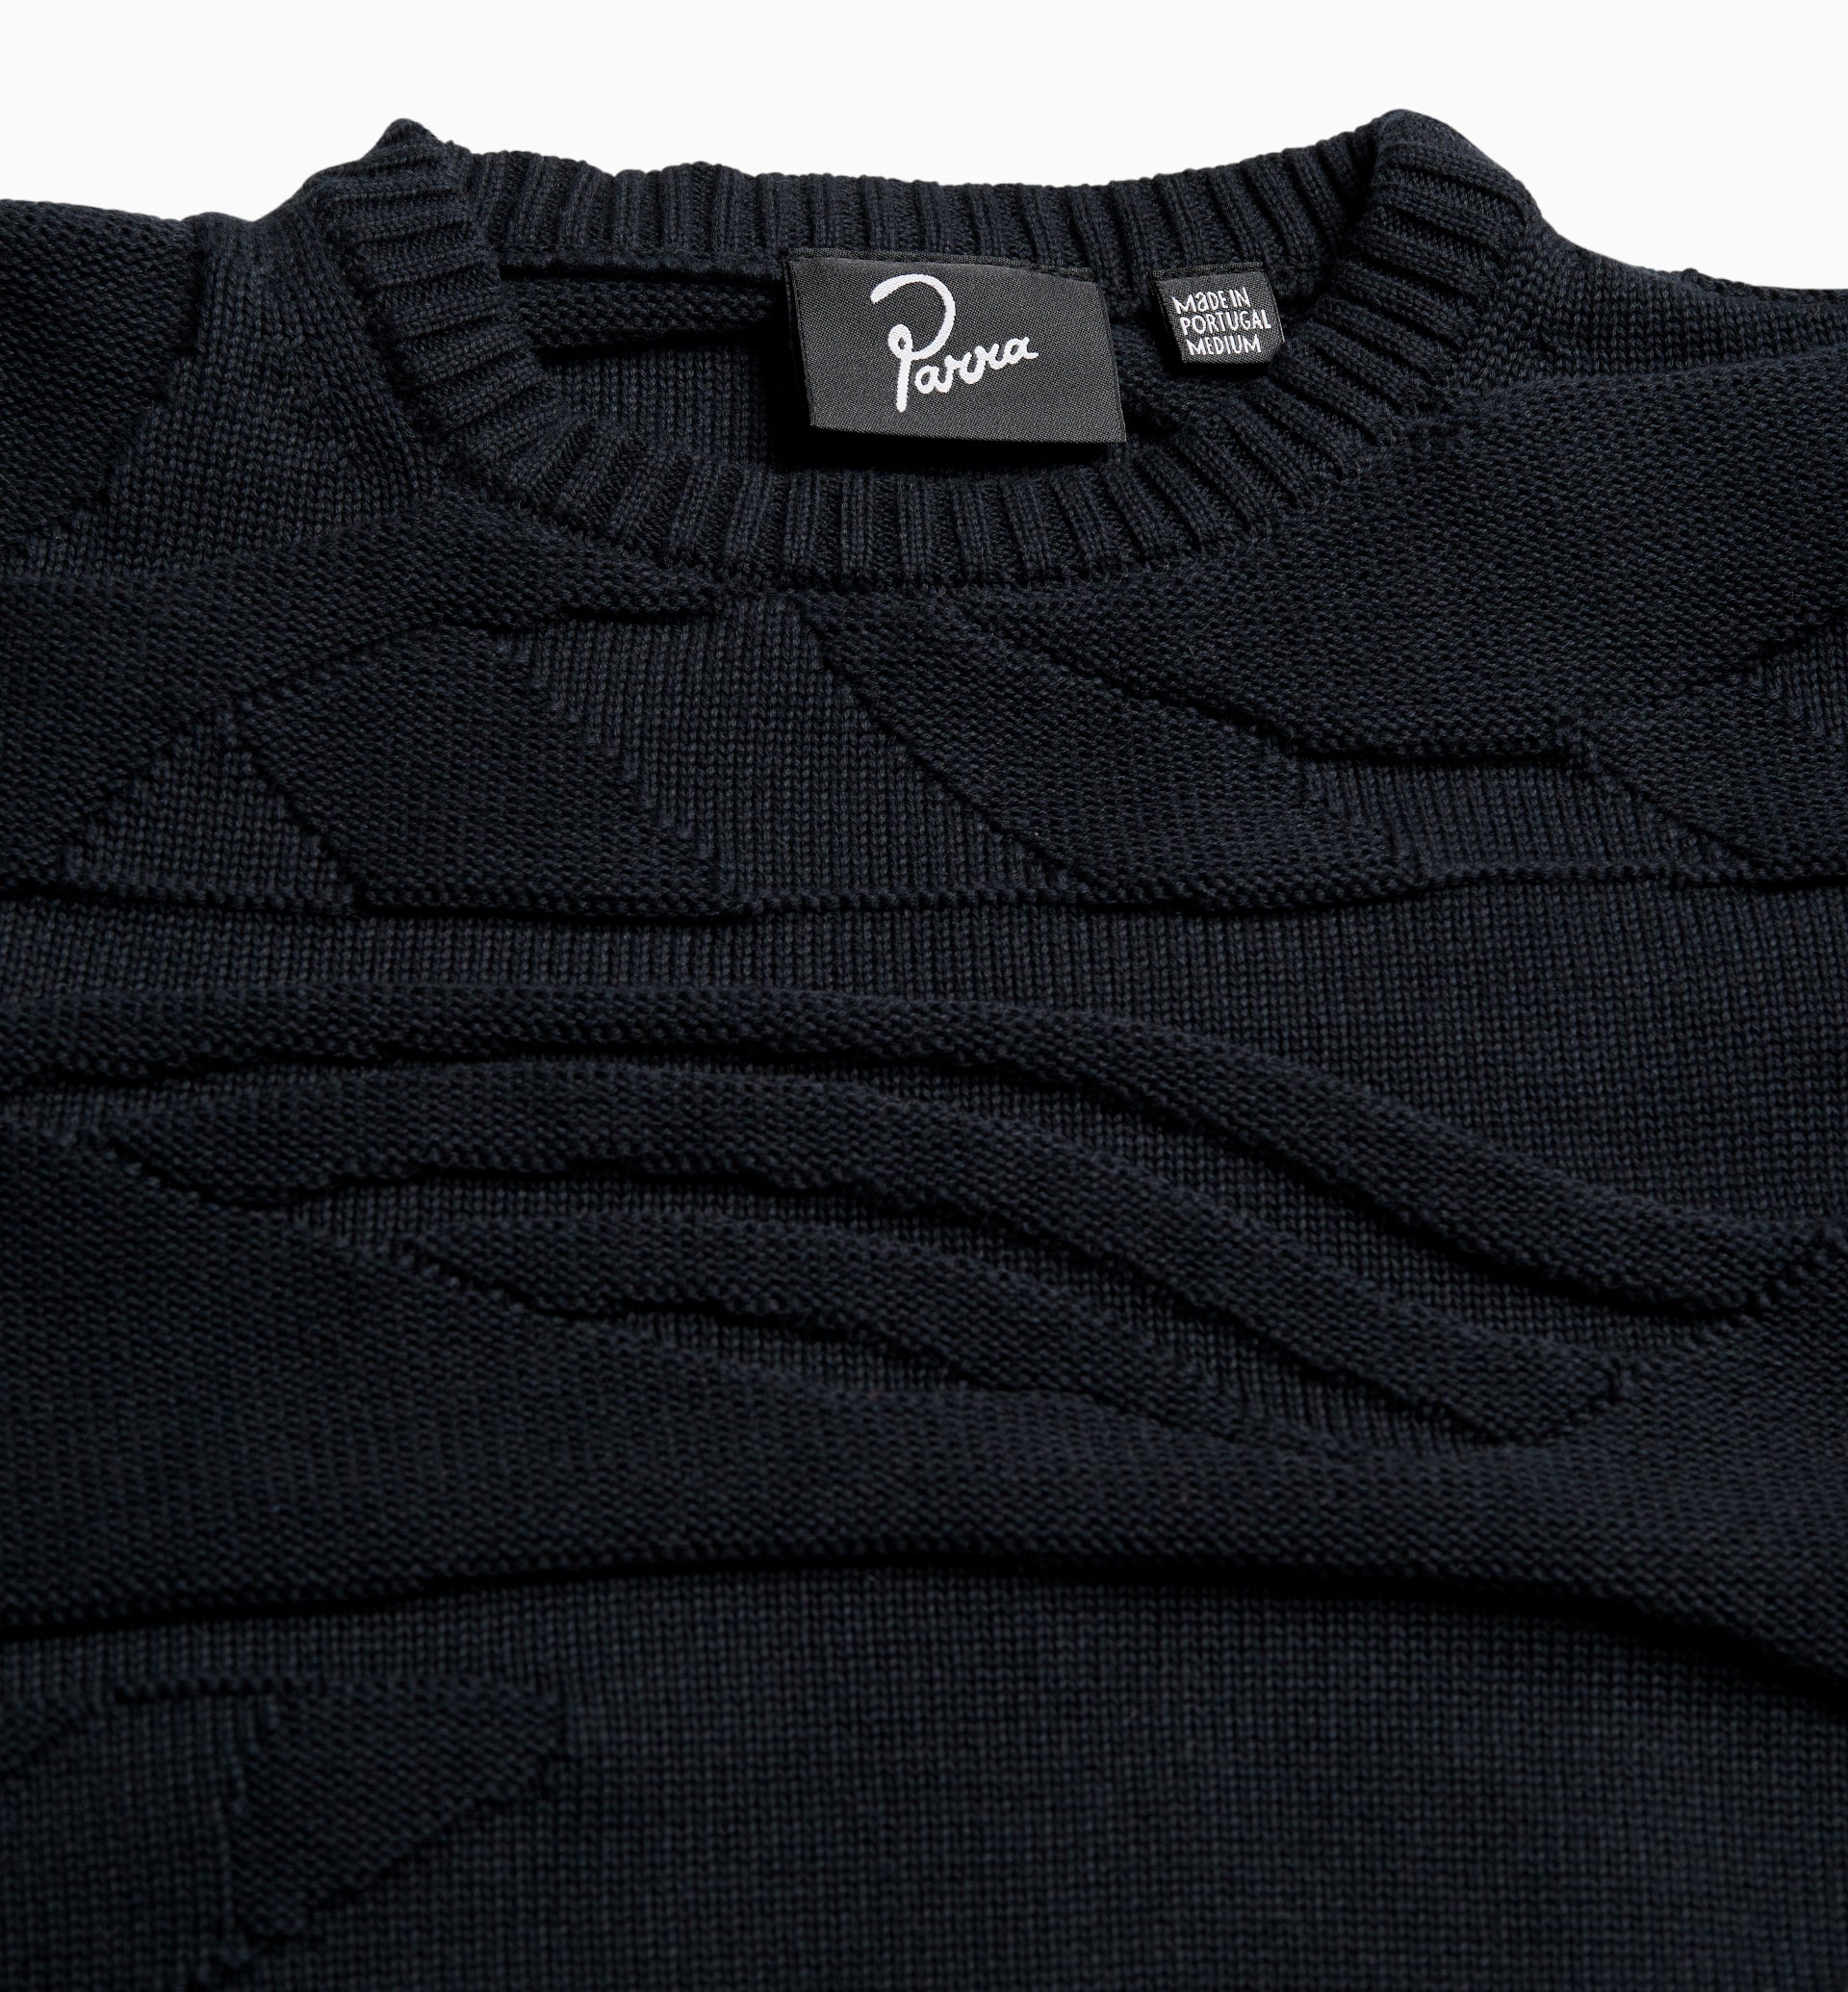 Parra - landscaped knitted pullover